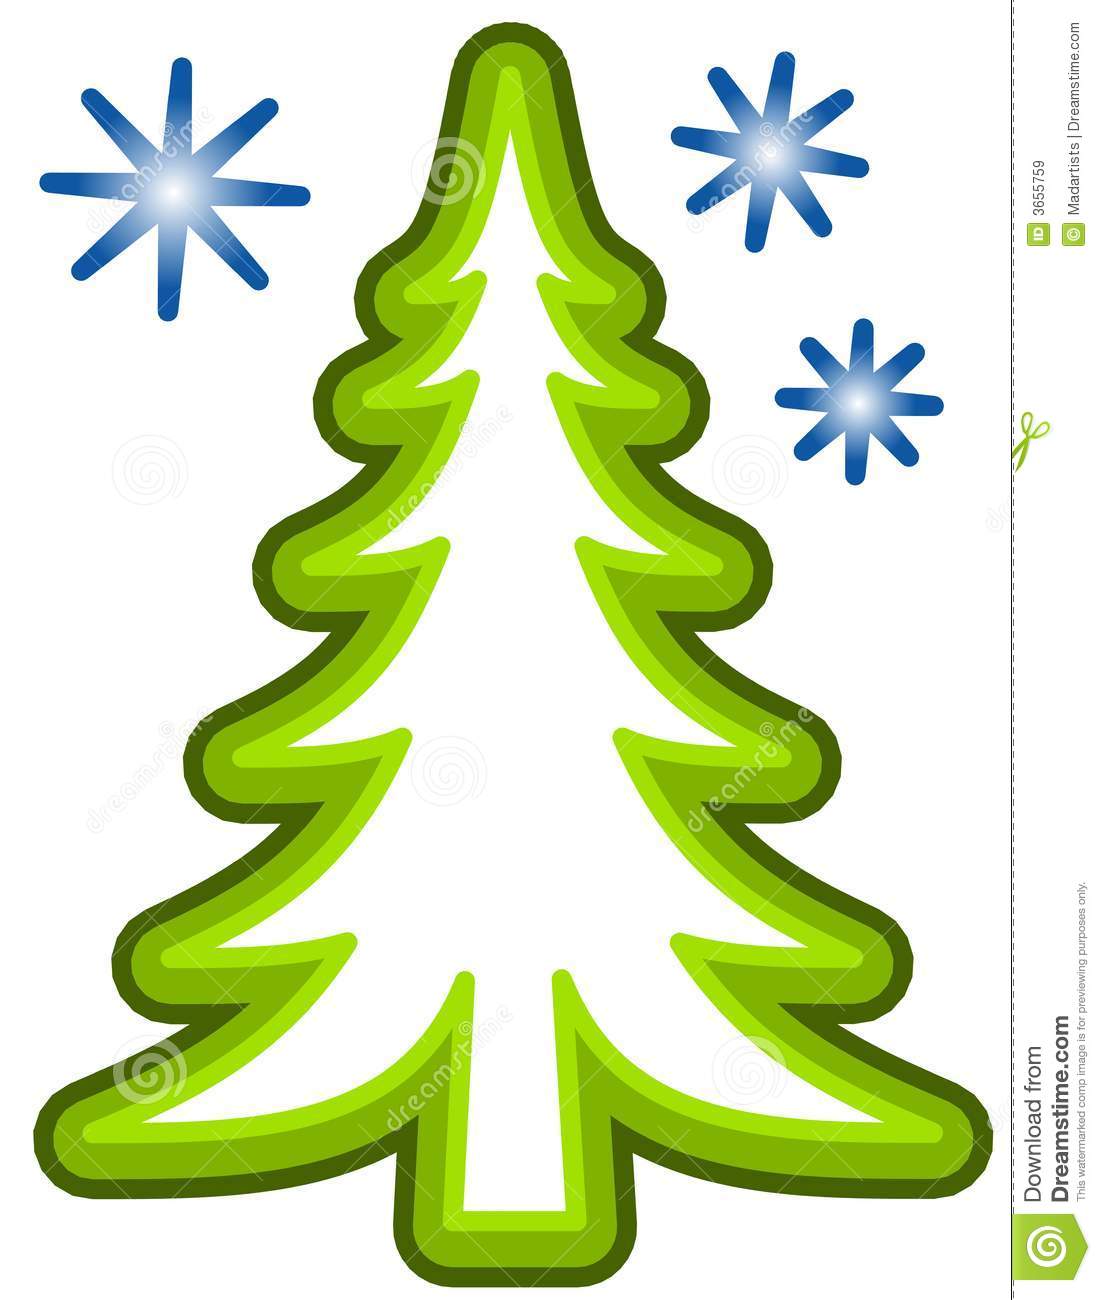 Simple Christmas Tree Clip Art Royalty Free Stock Images   Image